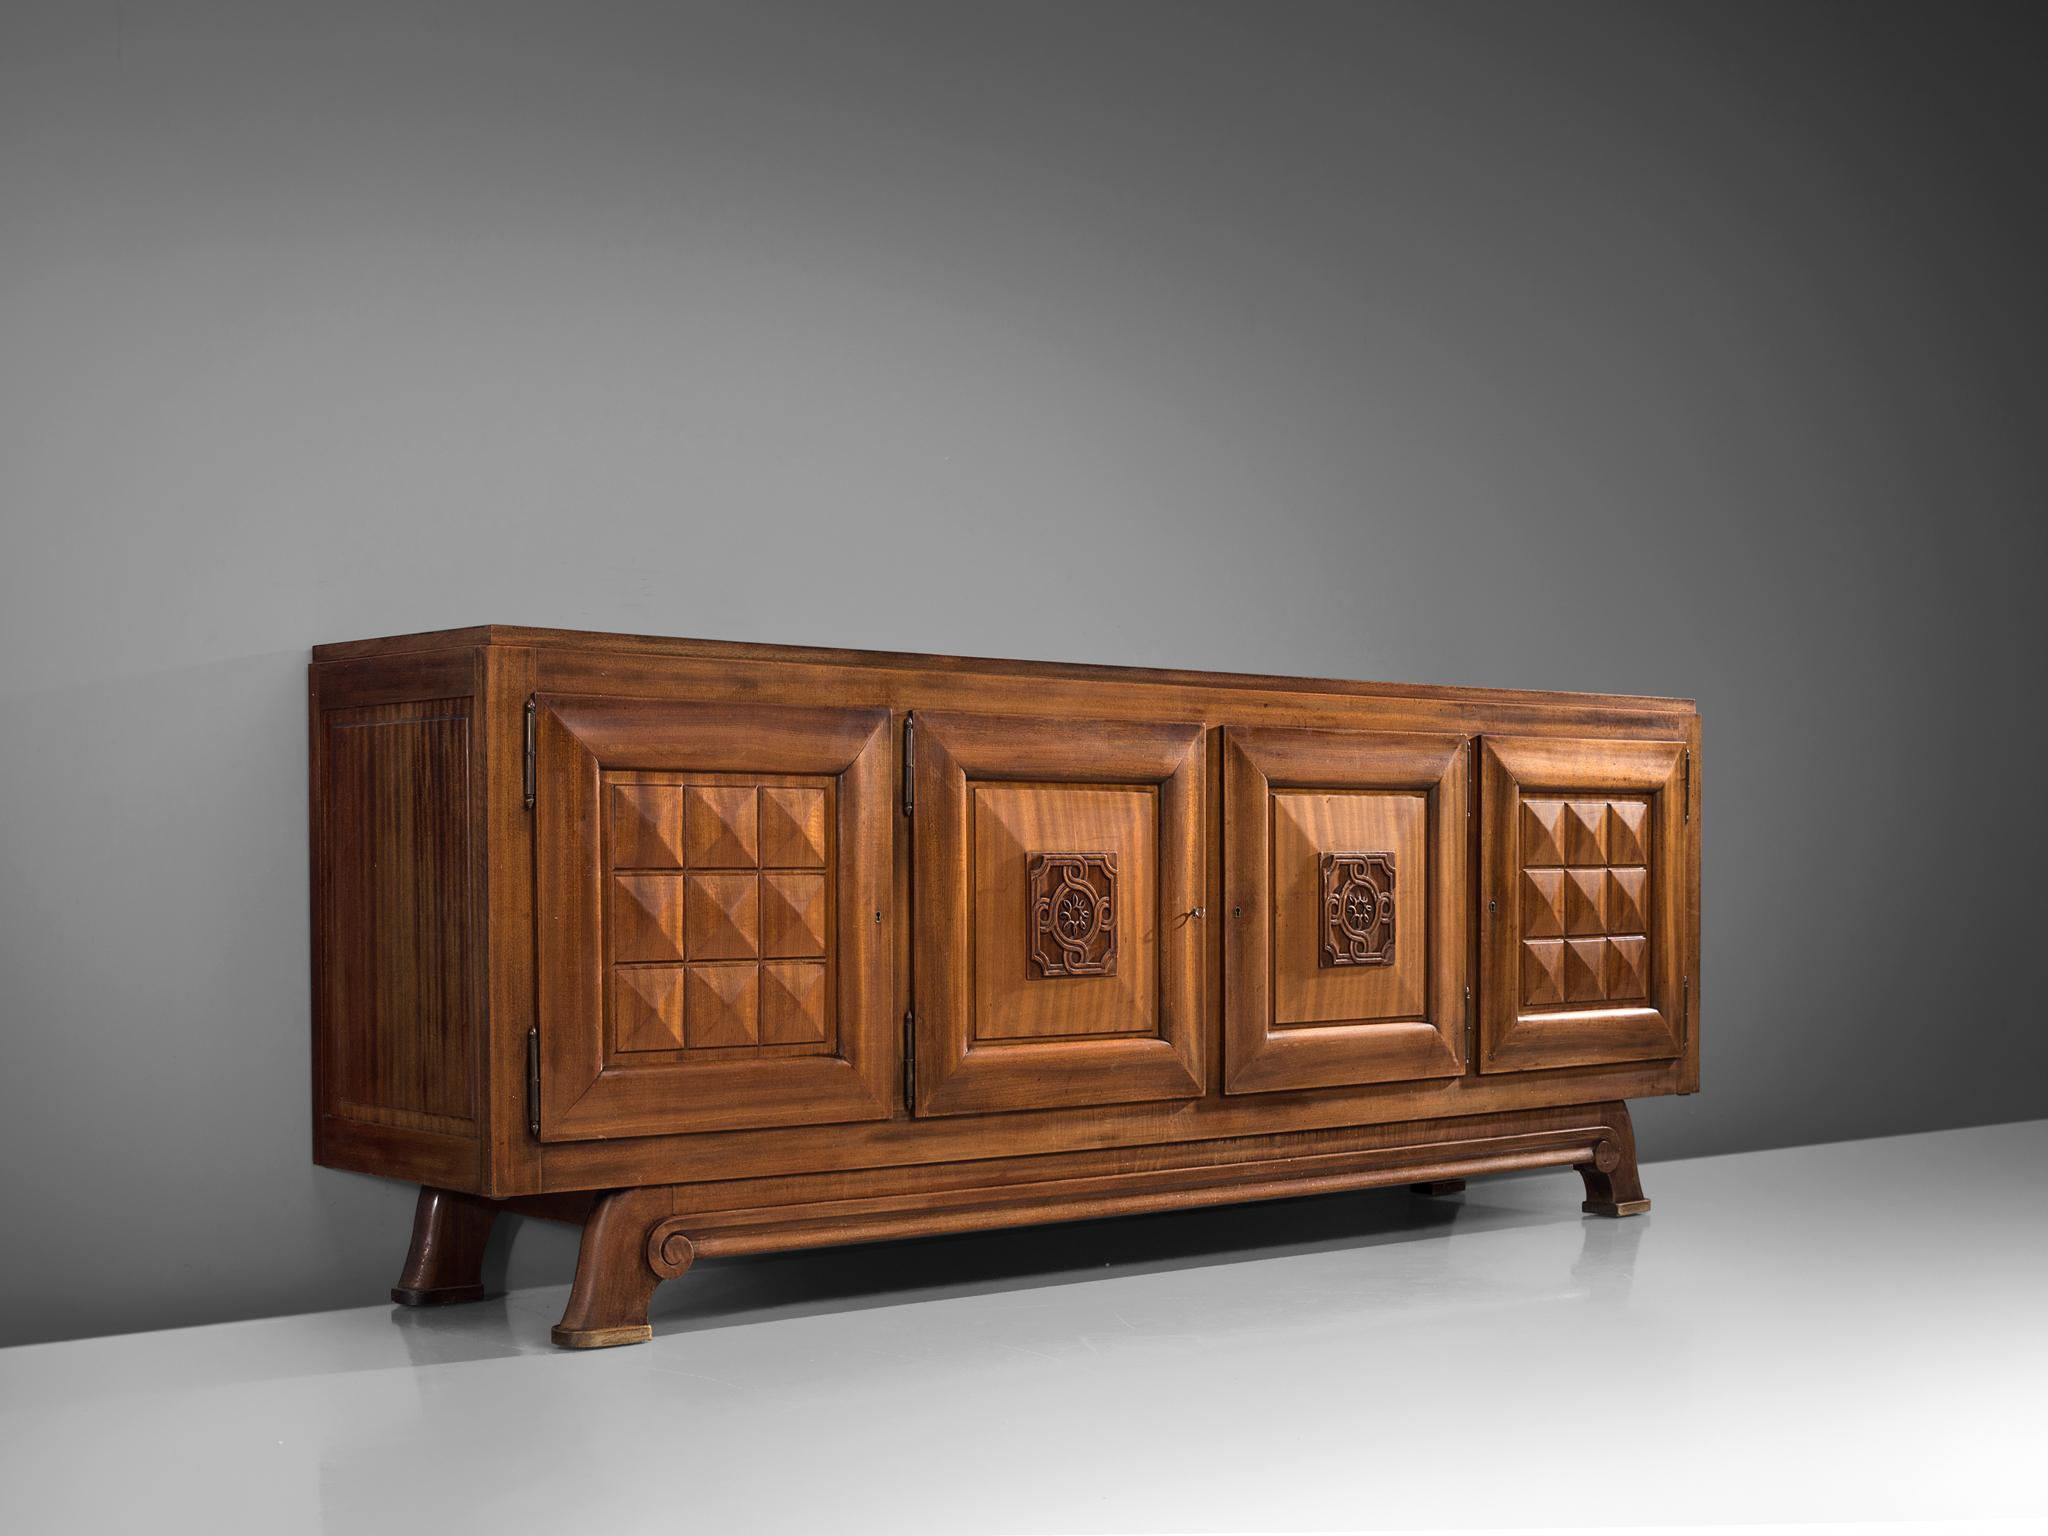 Gaston Poisson, credenza, mahogany, France, 1930s

Sturdy credenza in with graphical door panels and parquet top. This four-door sideboard is equipped with several shelves and drawers which provide plenty of storage space. Combined with the door